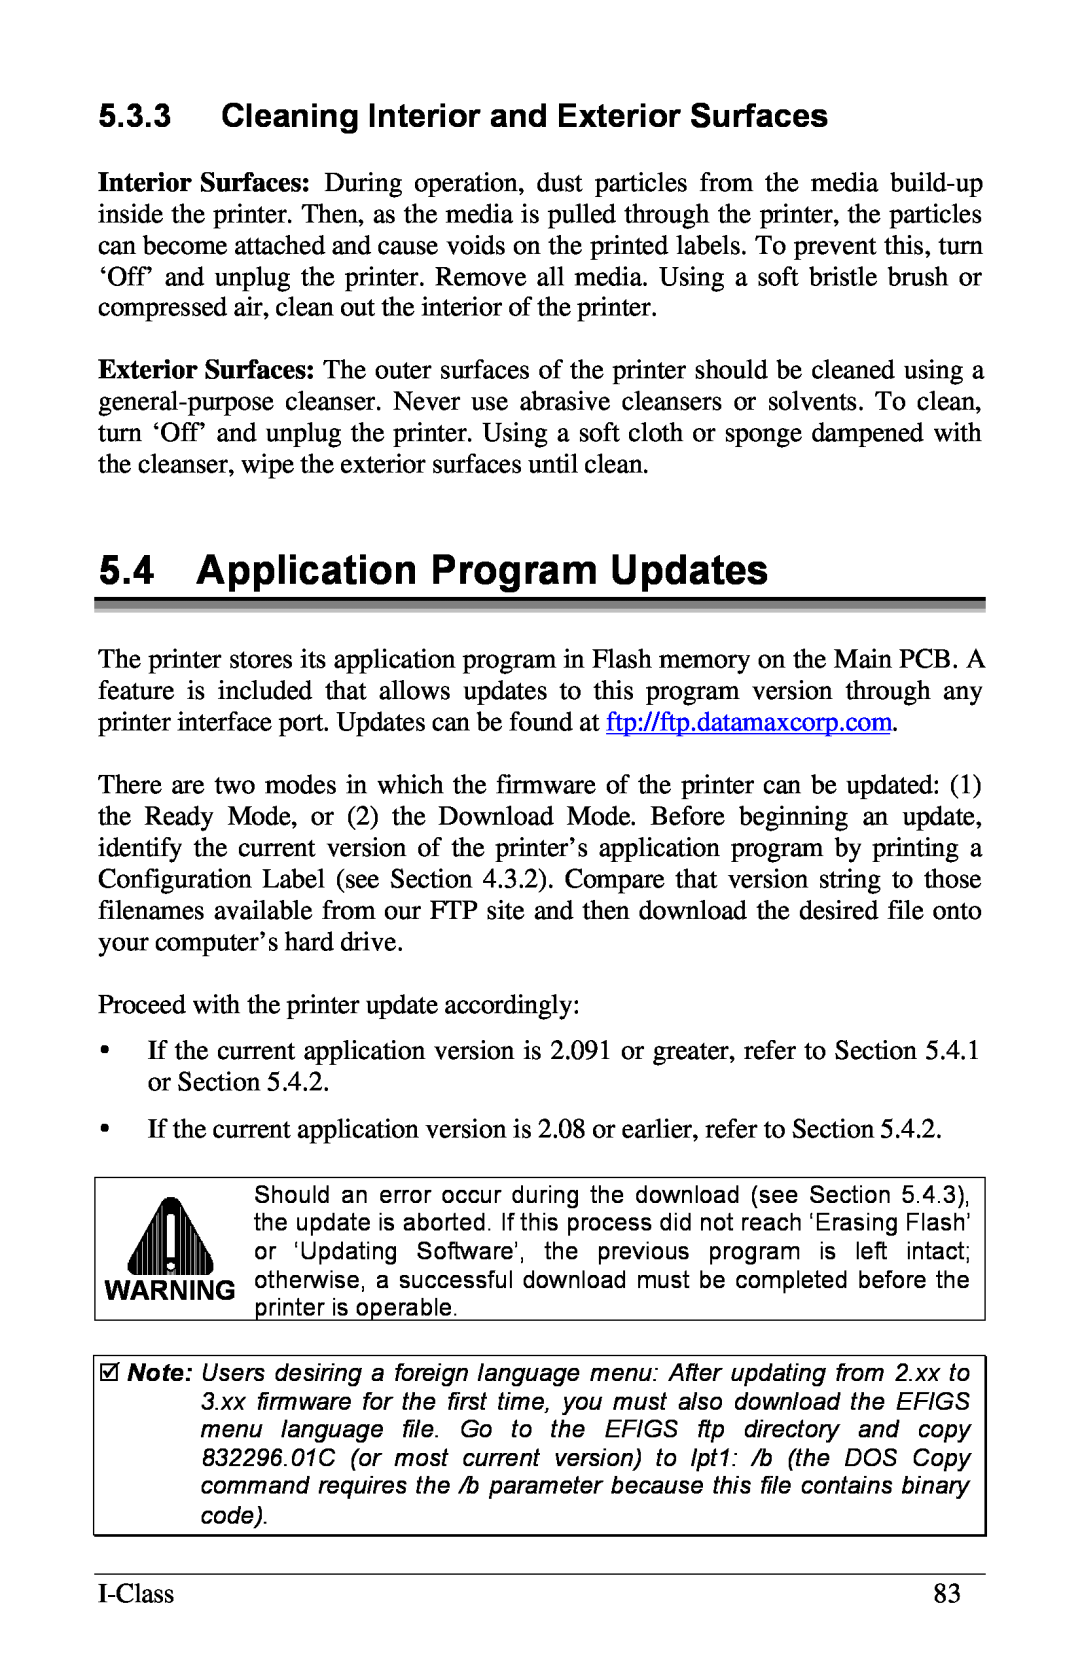 Xerox I Class manual 5.4Application Program Updates, 5.3.3Cleaning Interior and Exterior Surfaces 